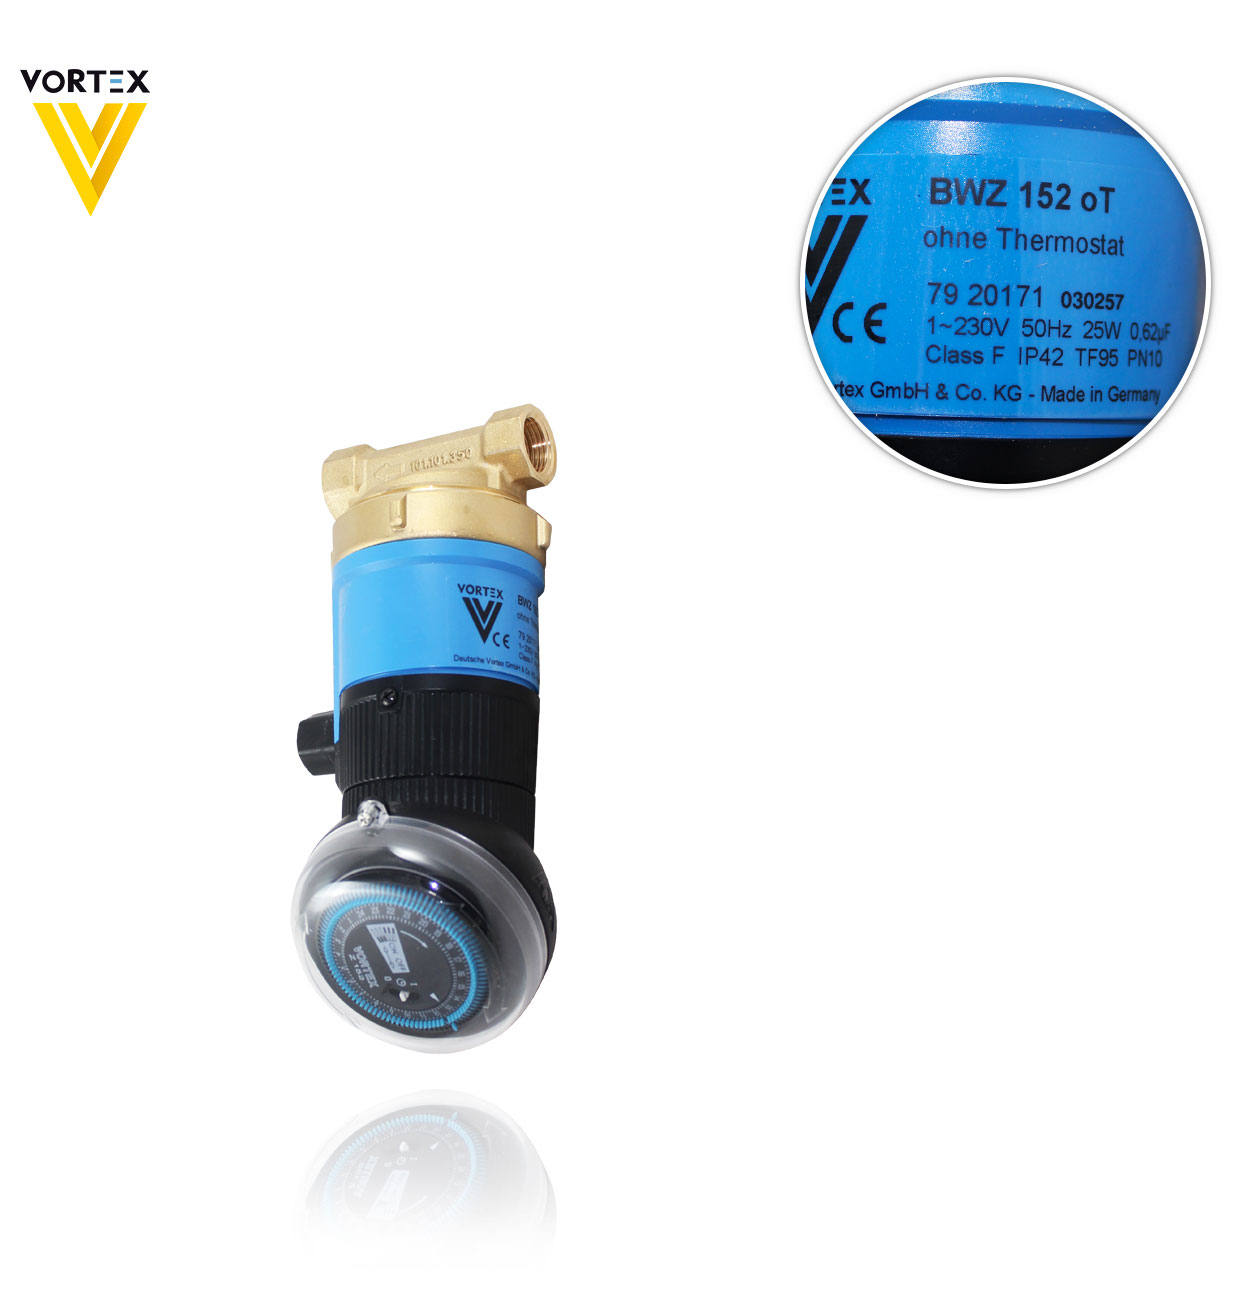 BWZ 152 R 1/2" OT VORTEX with timer, without thermostat